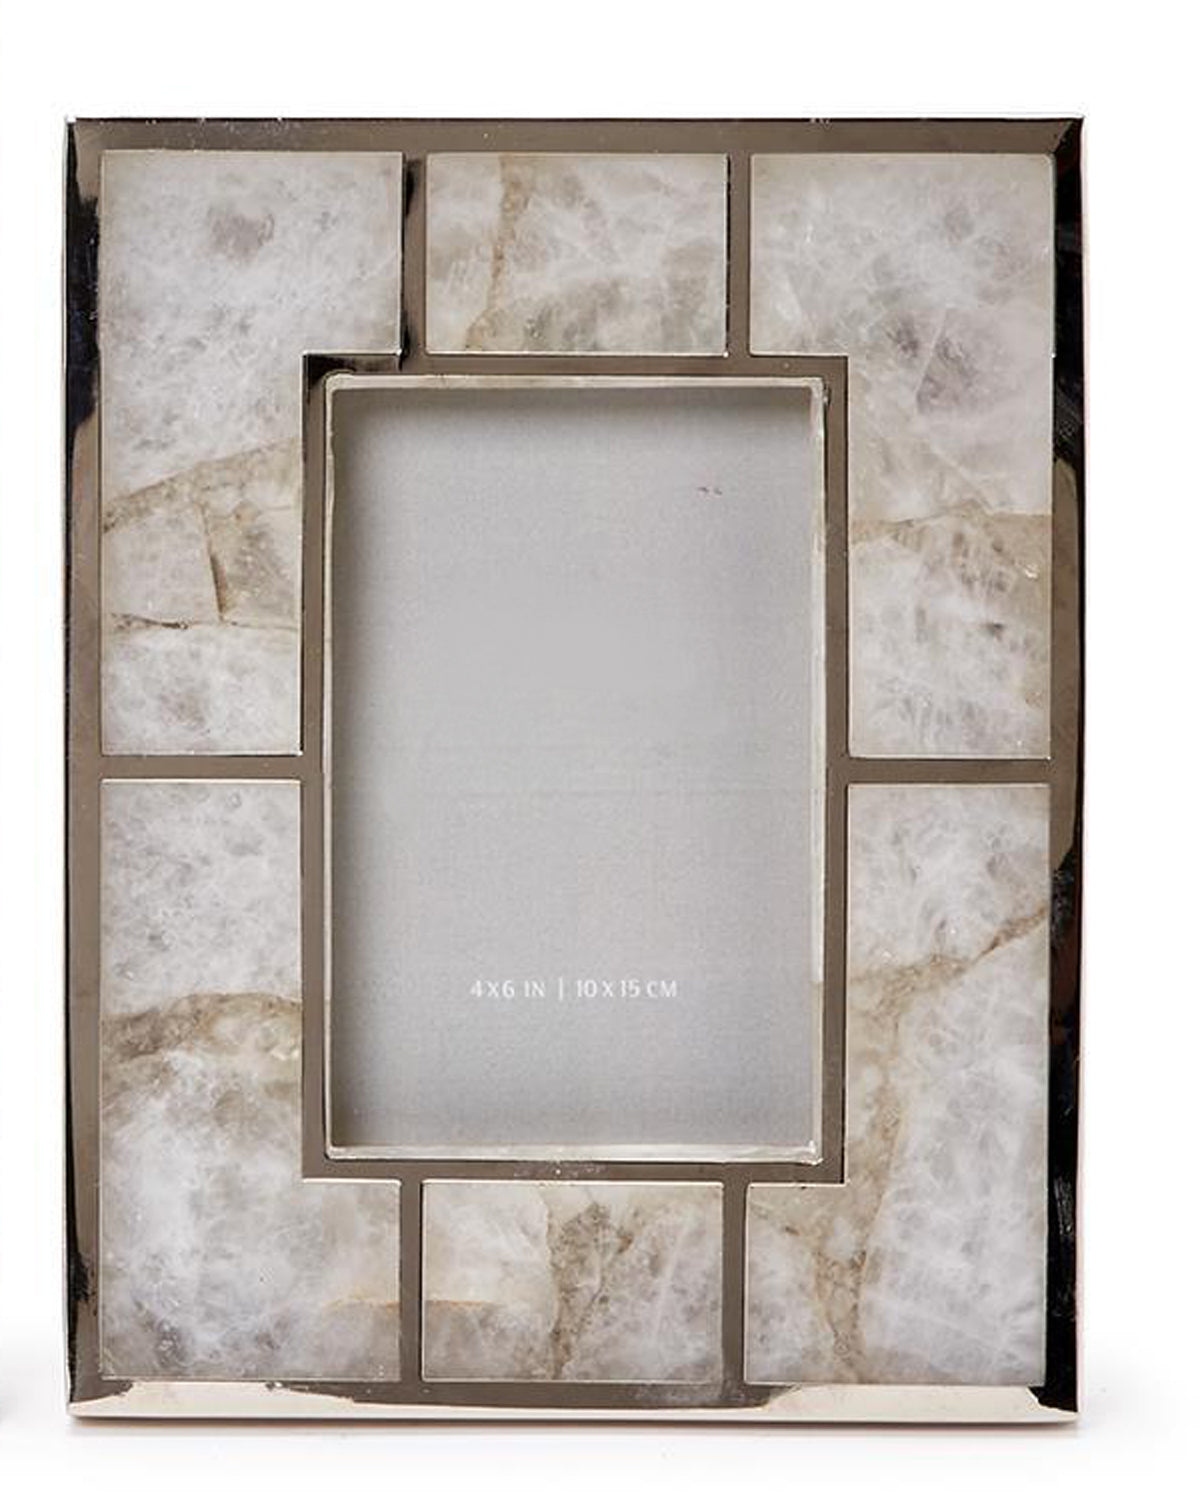 FRAME WHITE QUARTZ WITH NICKEL TRIM (Available in 2 Sizes)